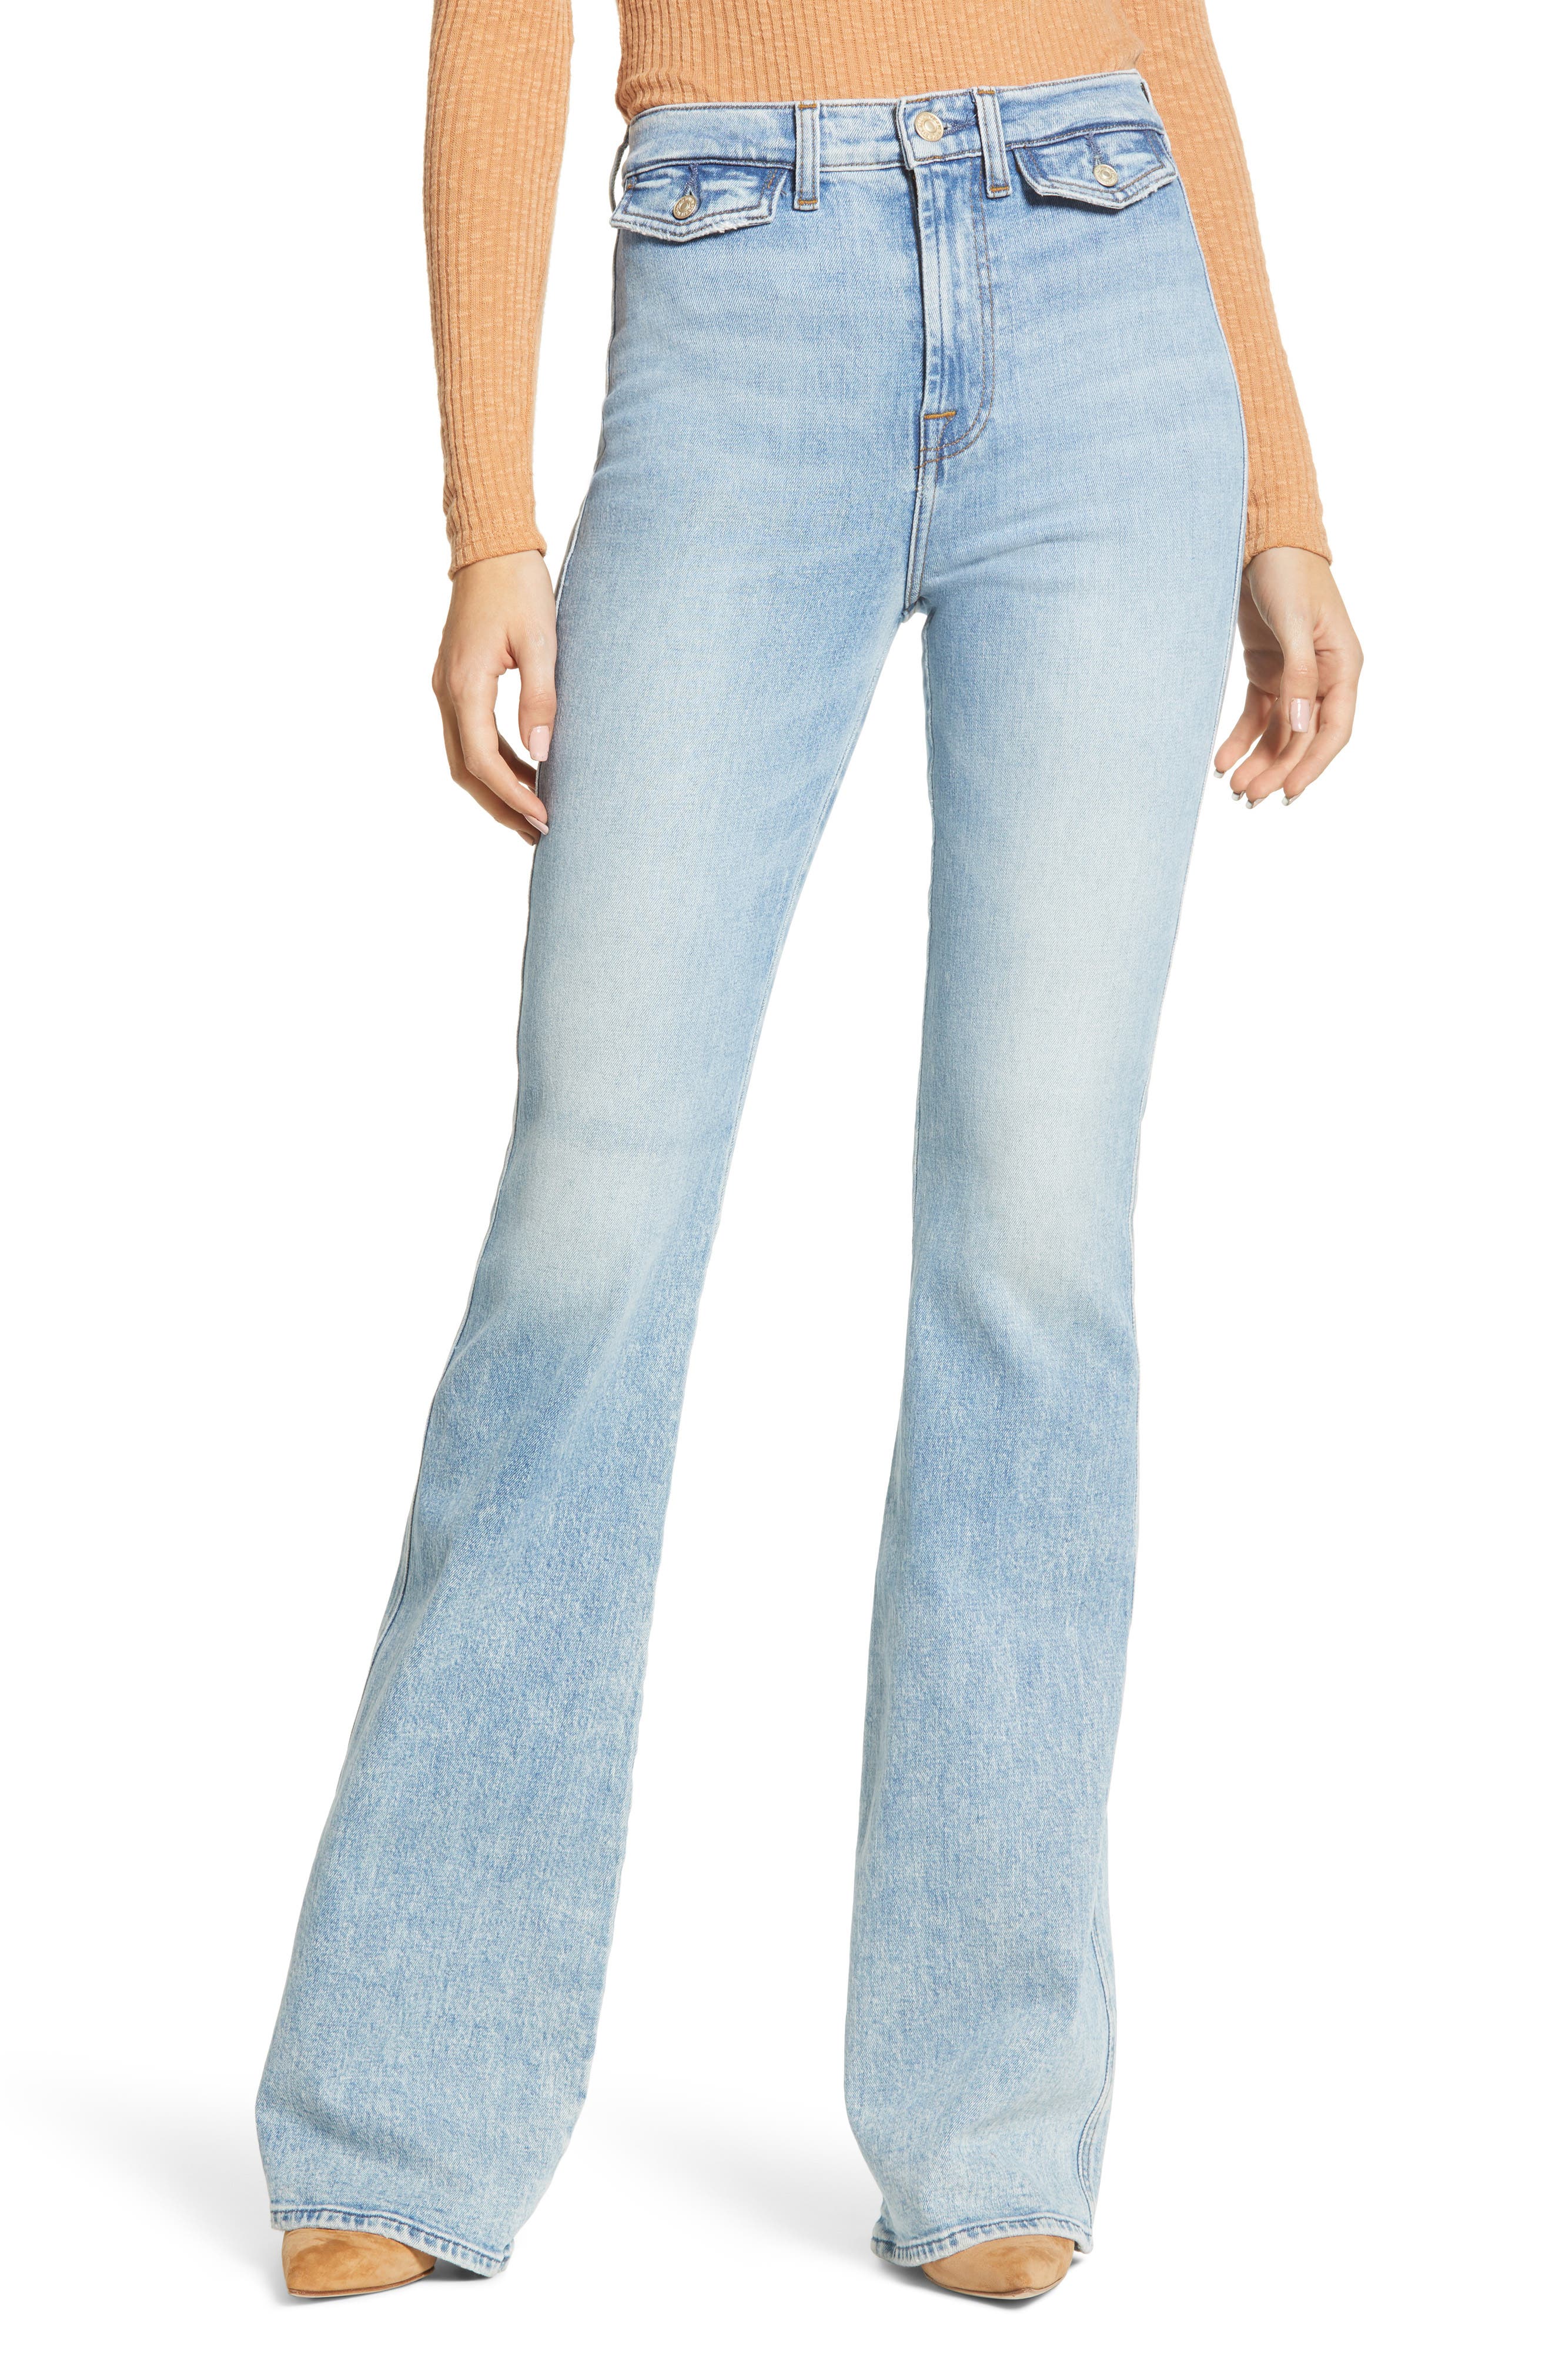 7 for all mankind a pocket flare